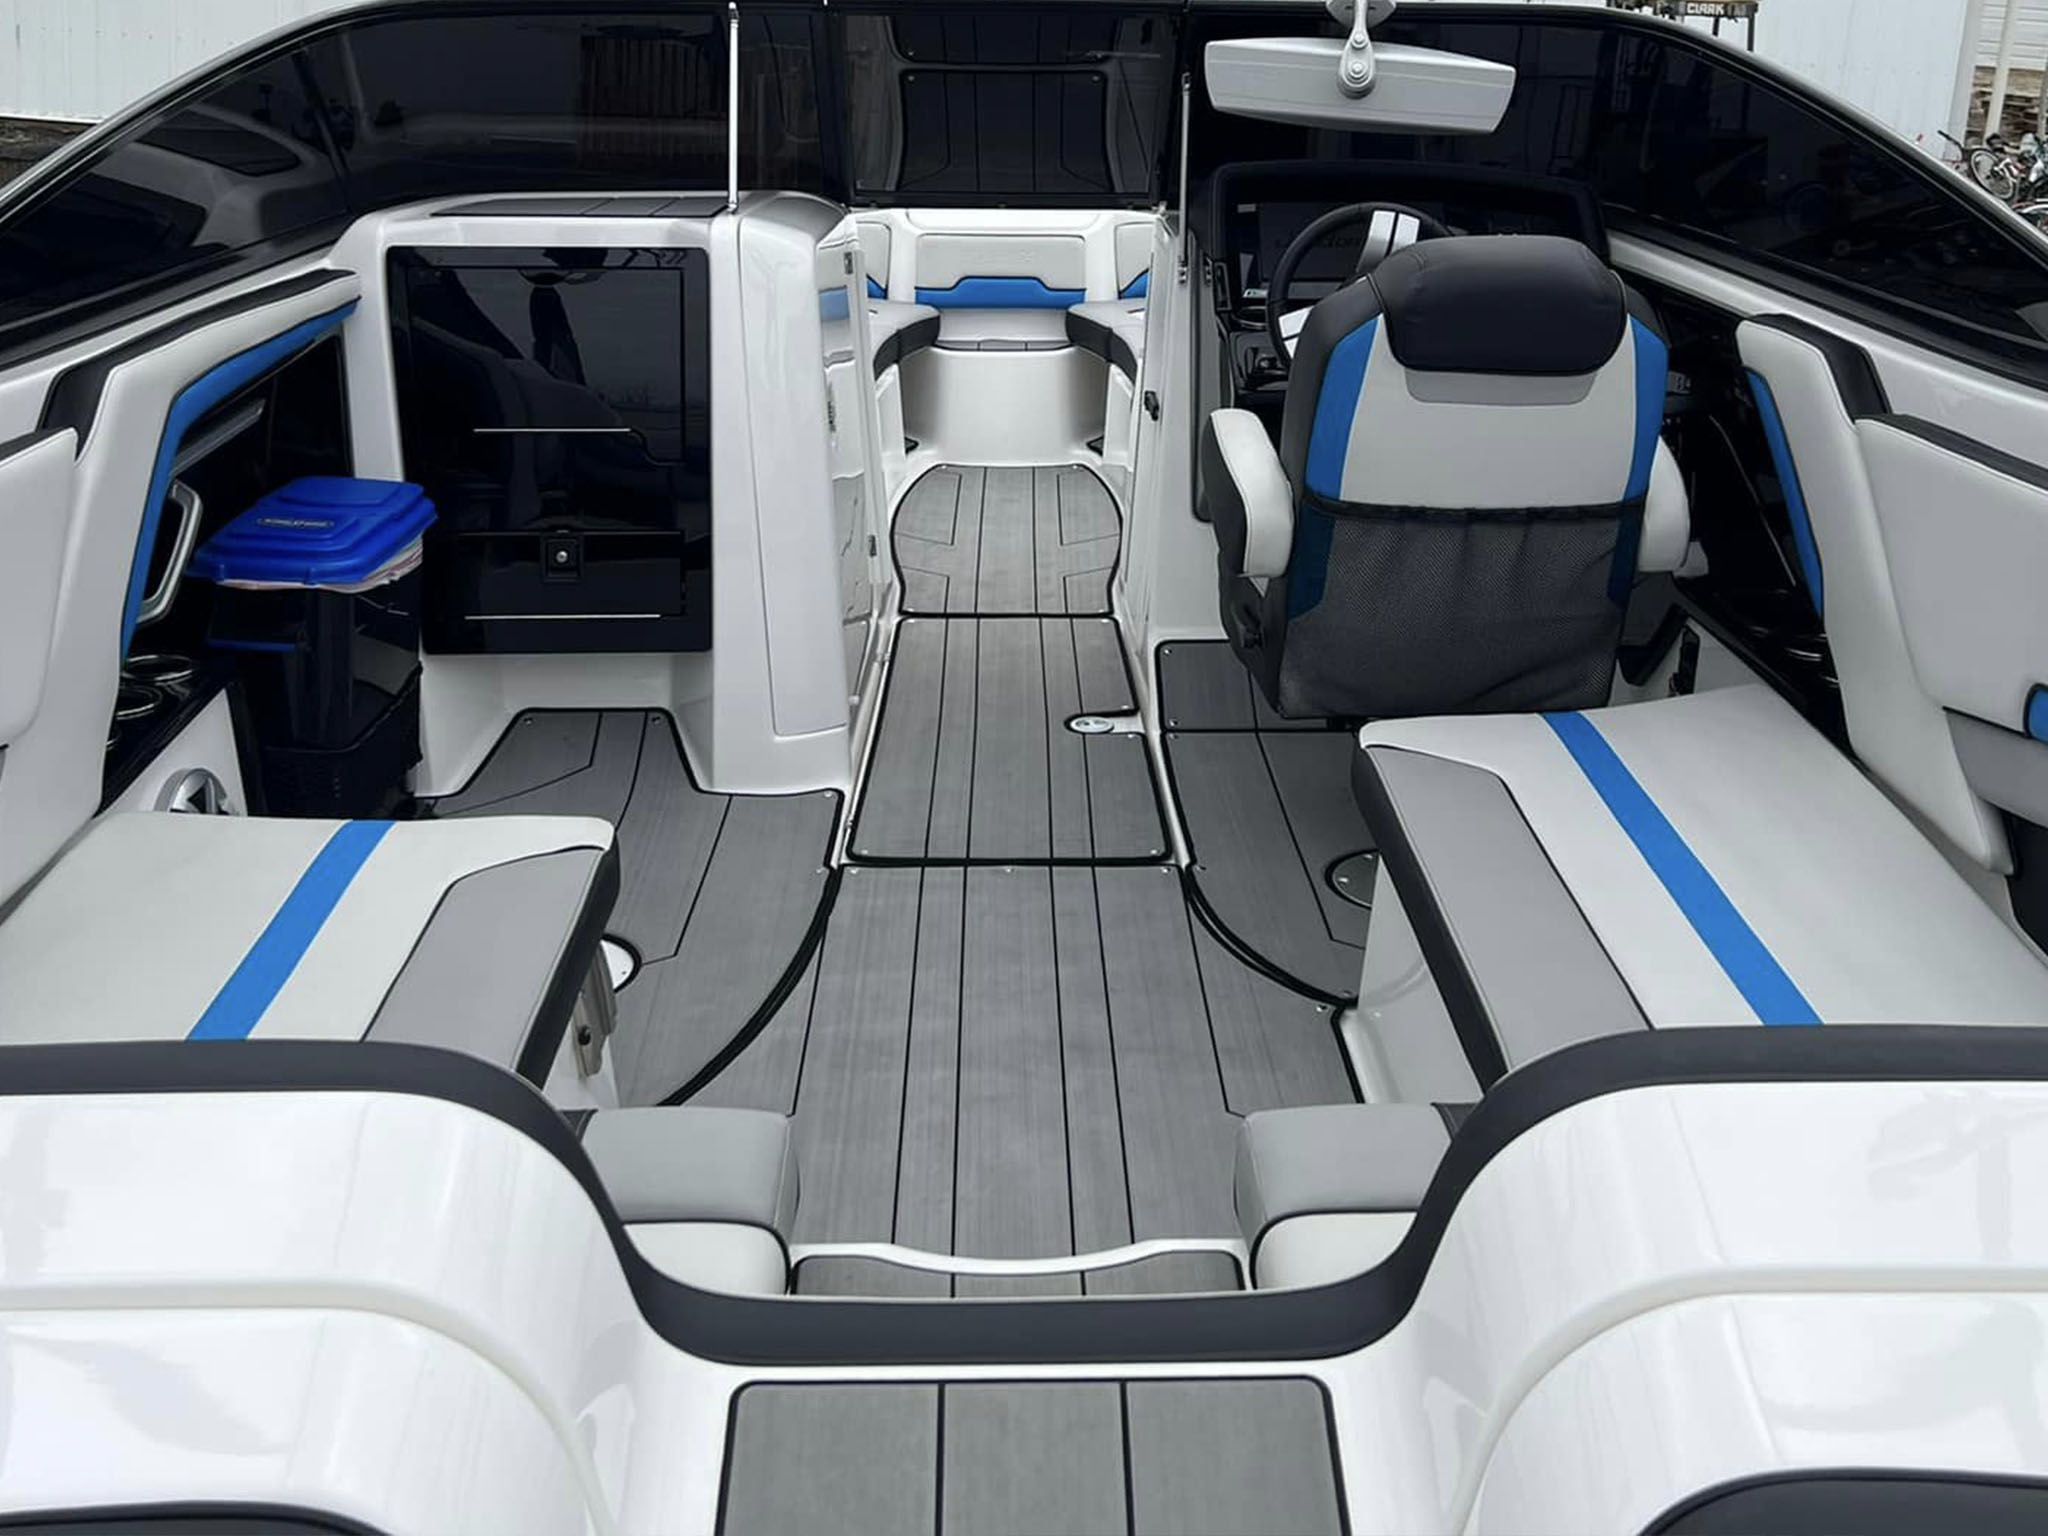 internal detailing service for marine or boat in Hamilton, Ohio